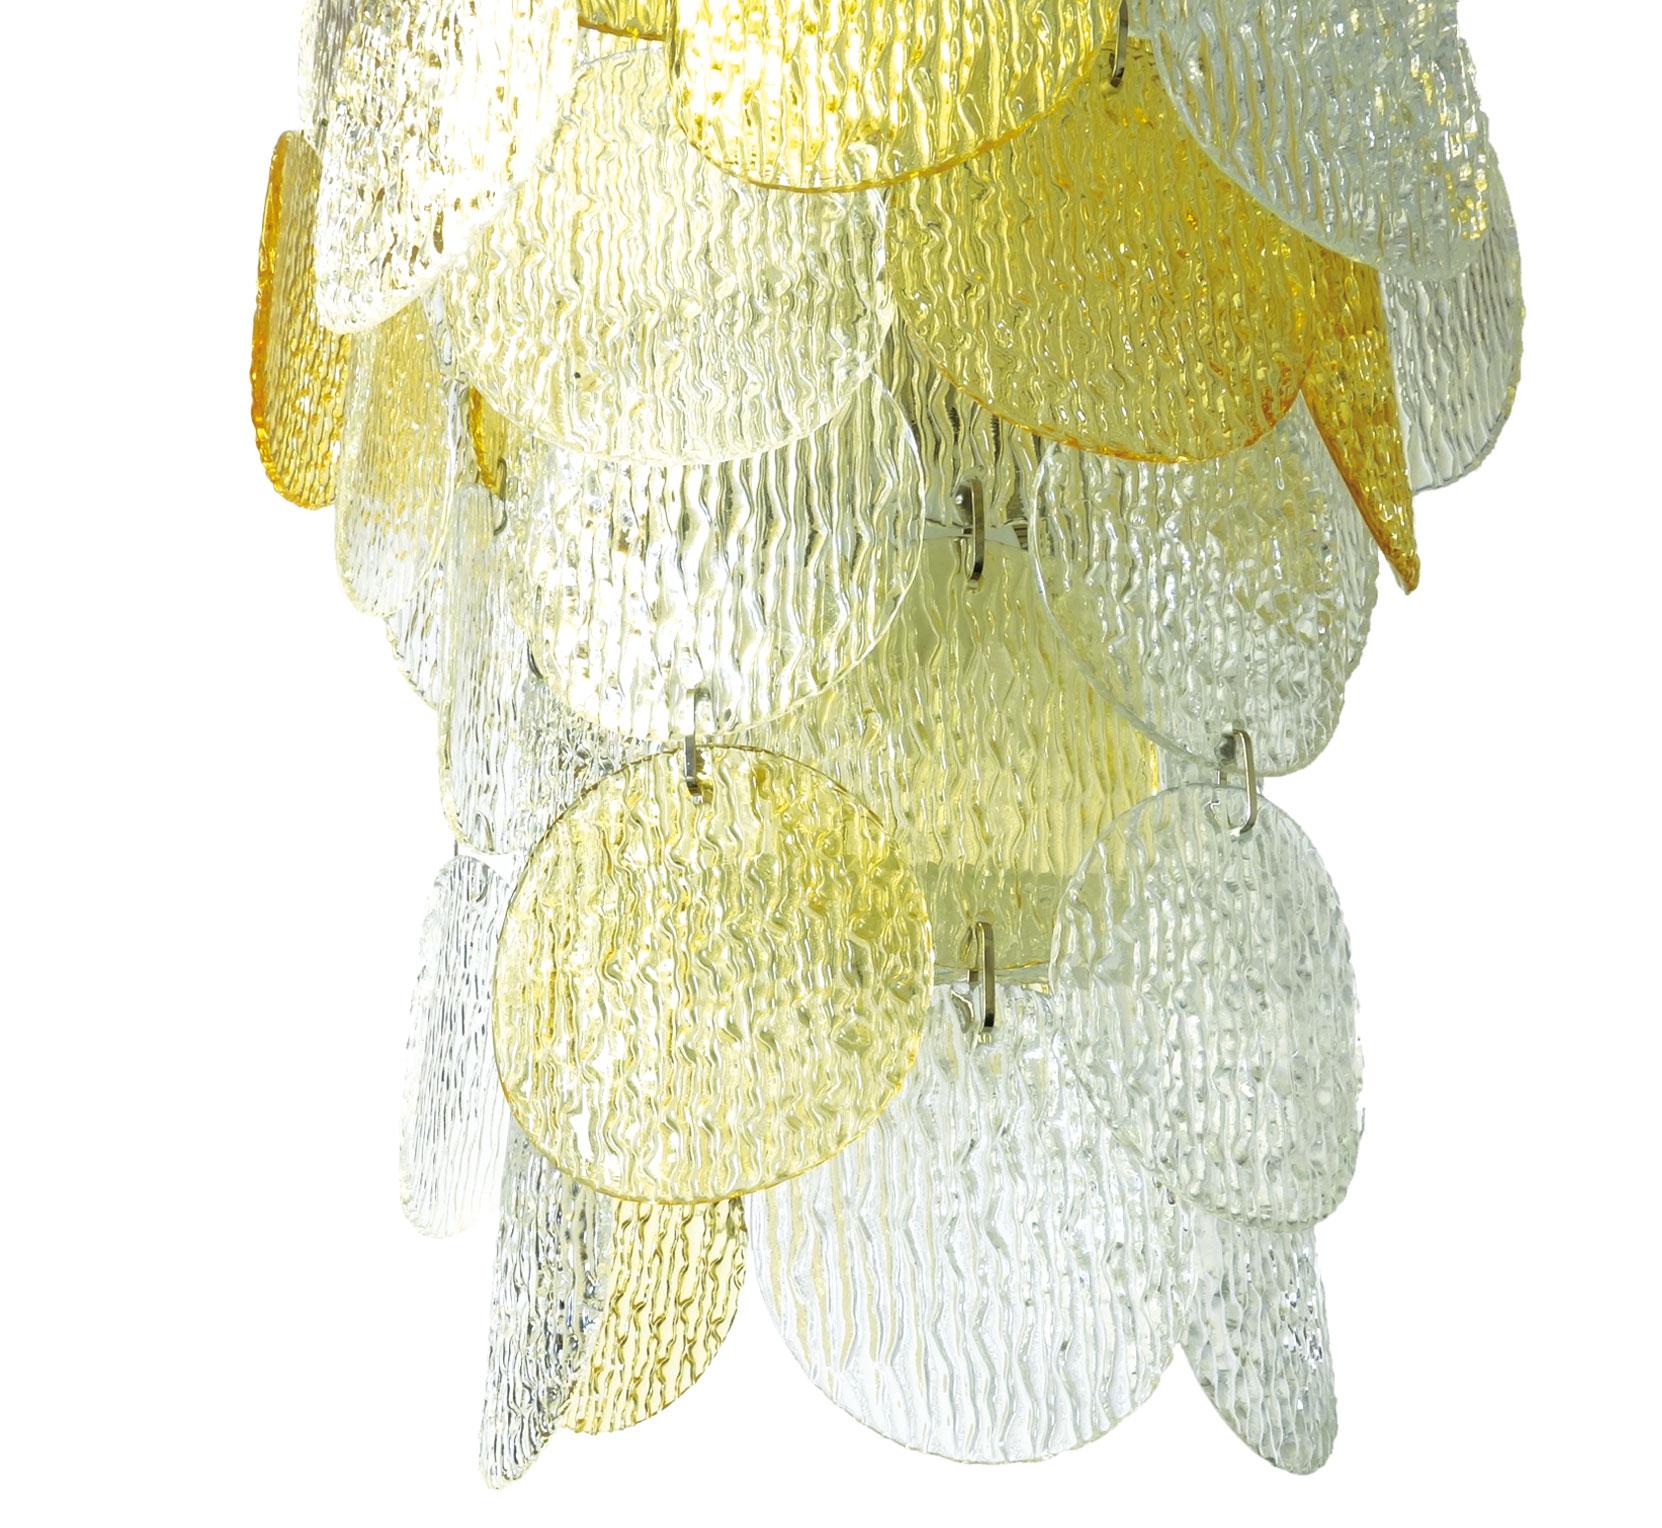 Chandelier Vistosi Torcello Murano glass pendant Italy 1970s yellow white. This object has 26 textured glass discs mounted on aluminum frame including 6 bulb fittings. This chandelier was manufactured in Italy most probably during the early 1970s.